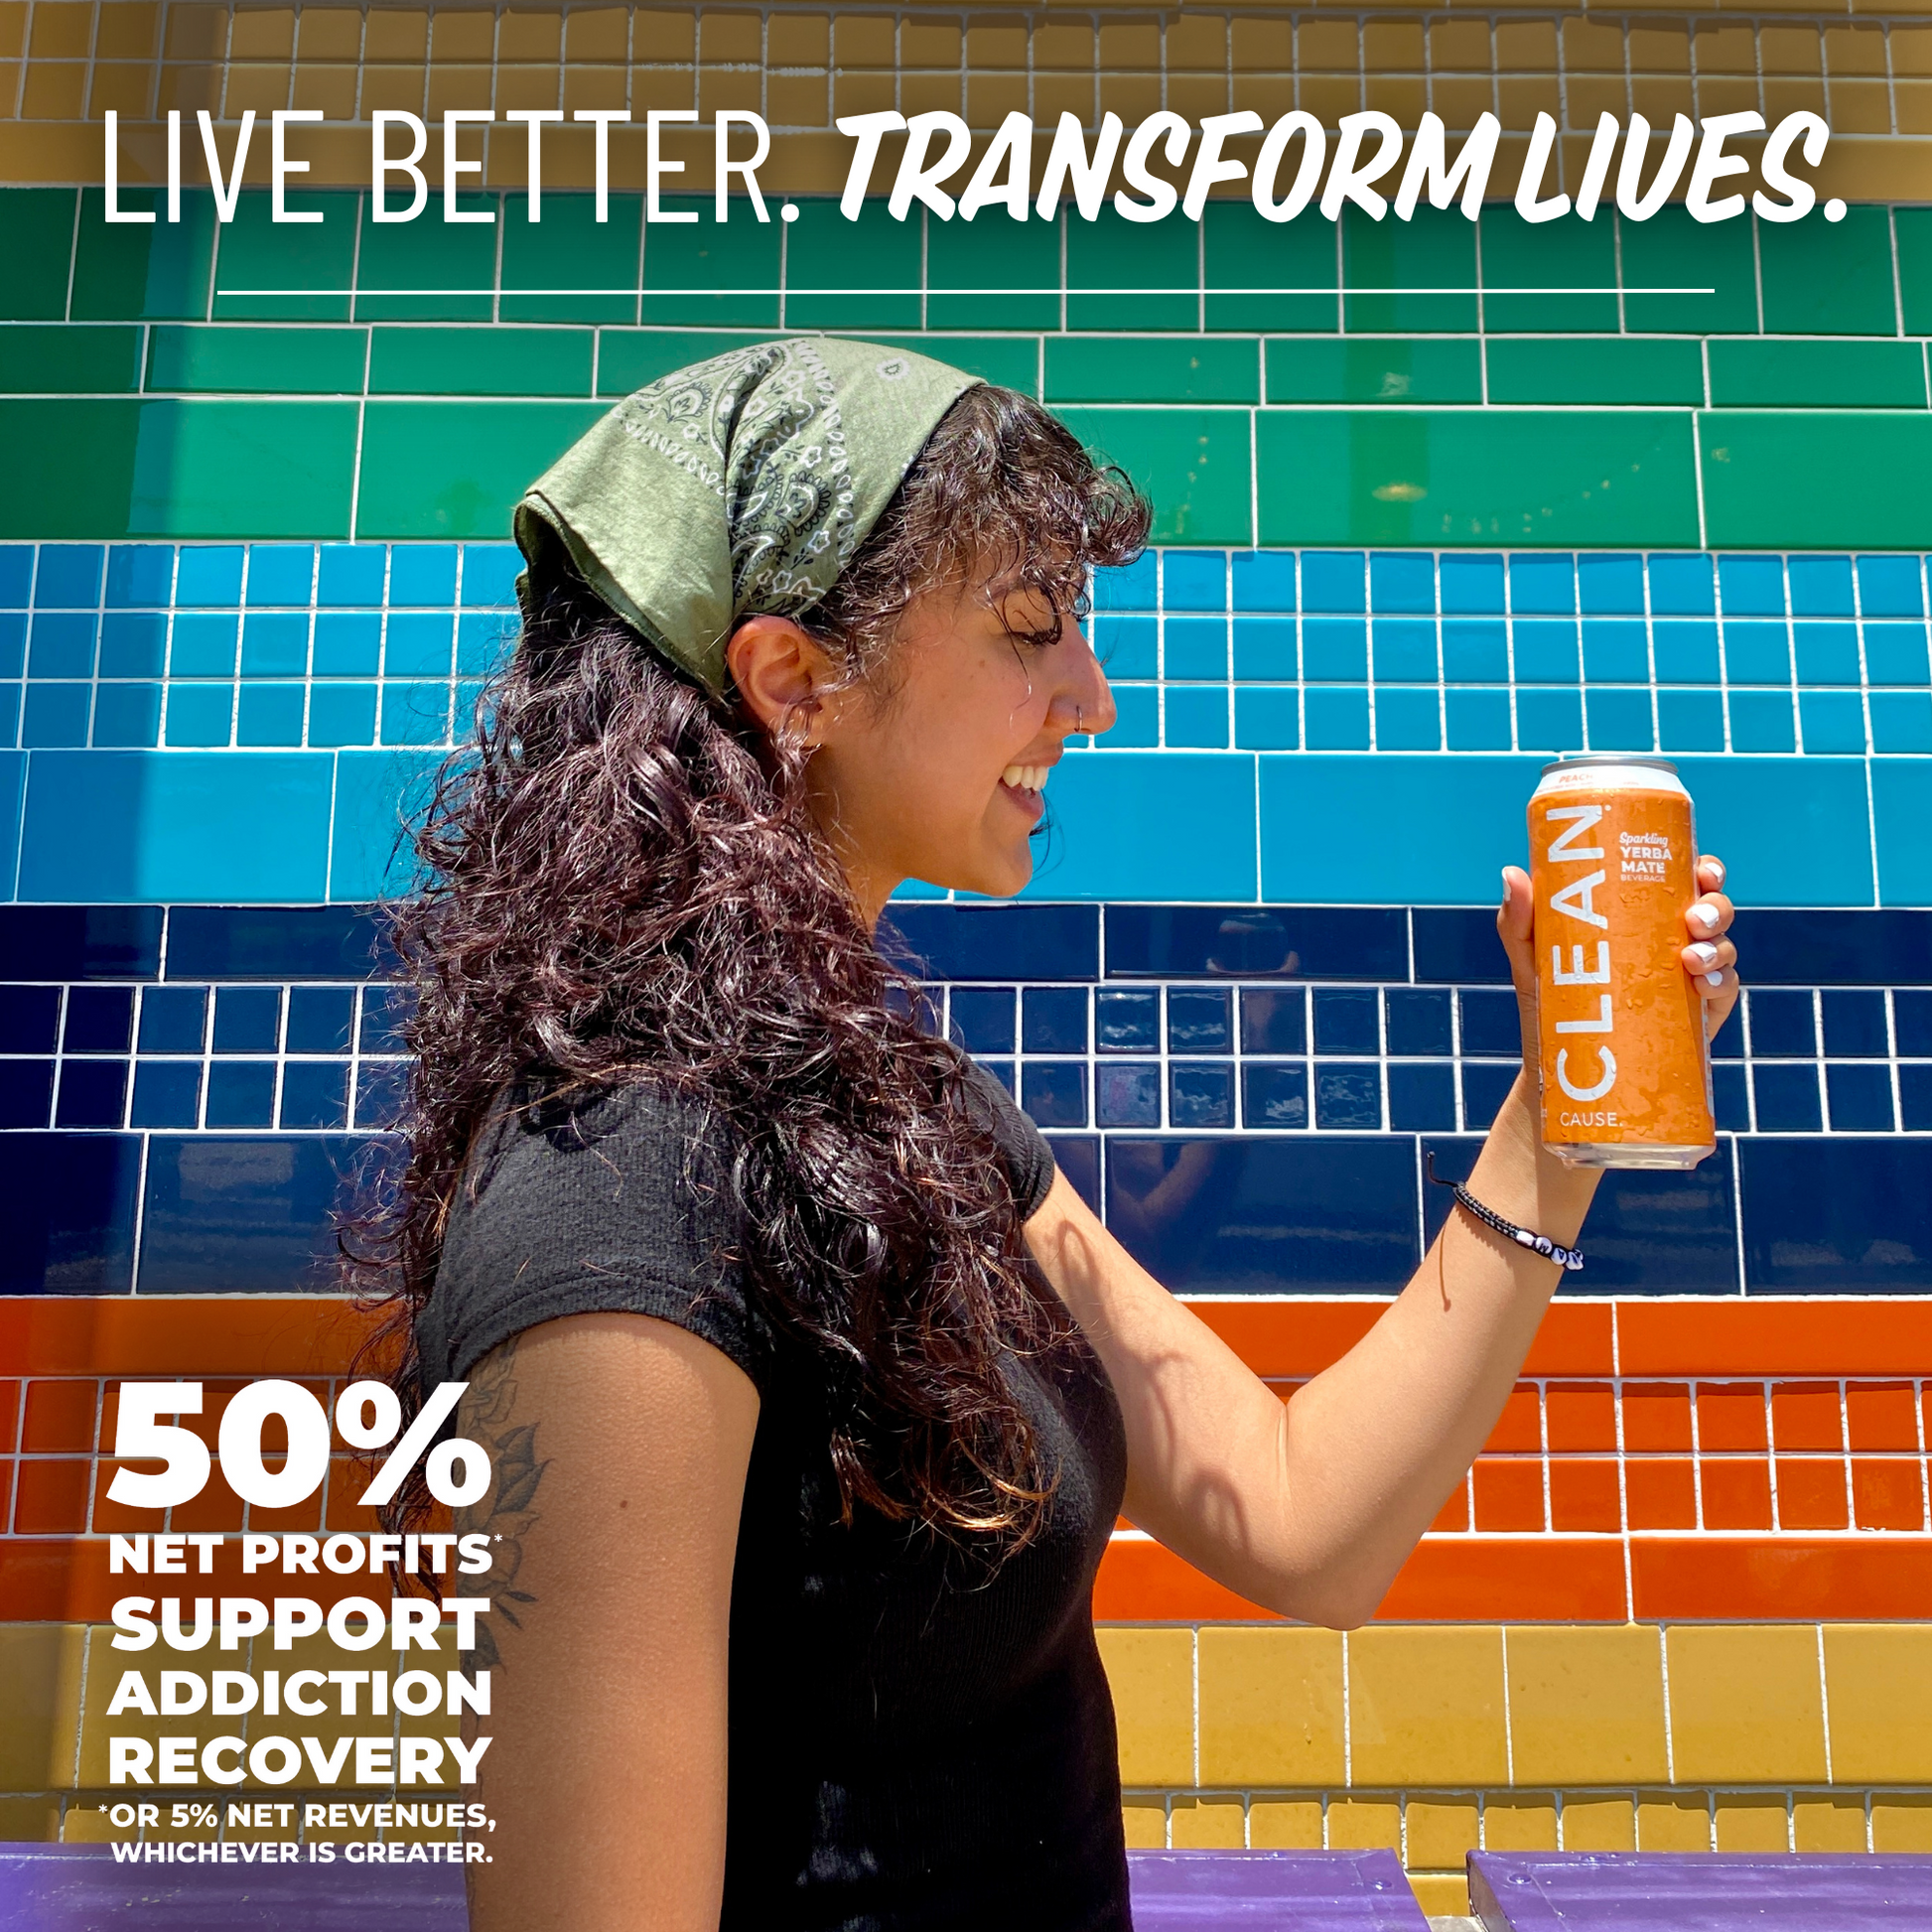 A beautiful, wonderful girl smiling holding a CLEAN Cause Peach can with the slogan Live Better. Transform Lives. above her and 50% Net profits* support addiction recovery *or 5% net revenues, whichever is greater